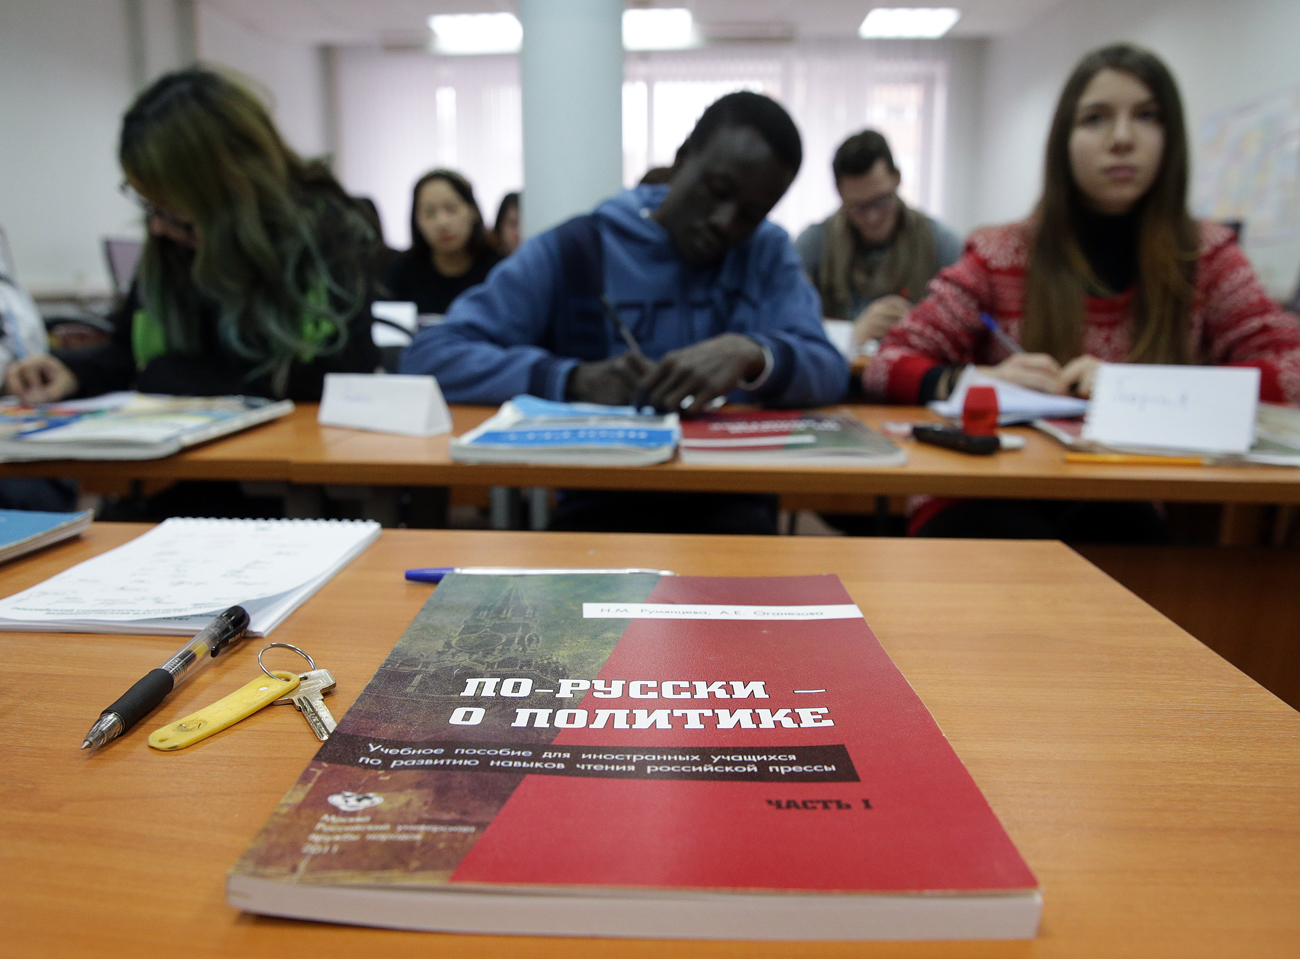 According to the Russian Ministry of Education and Science, there are more than 1 million people from 160 countries who have graduated from Russian universities. Photo: Russian language classes at the Peoples' Friendship University in Moscow.